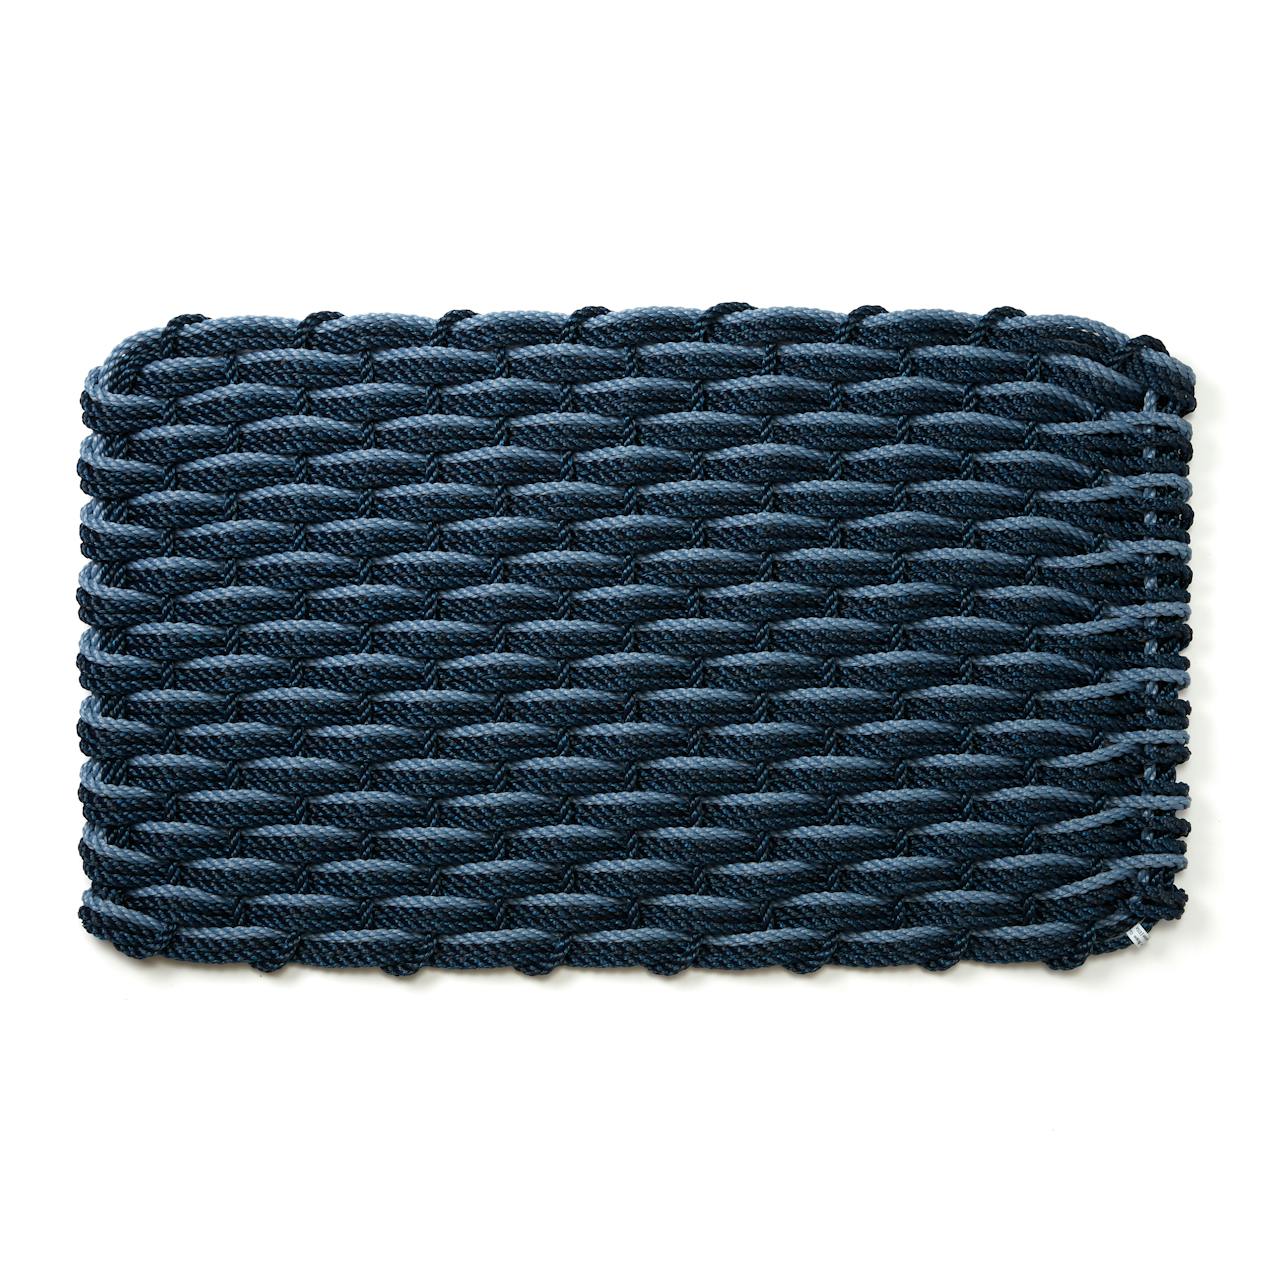 The Rope Co. Hand Woven Lobster Rope Doormat - Standard